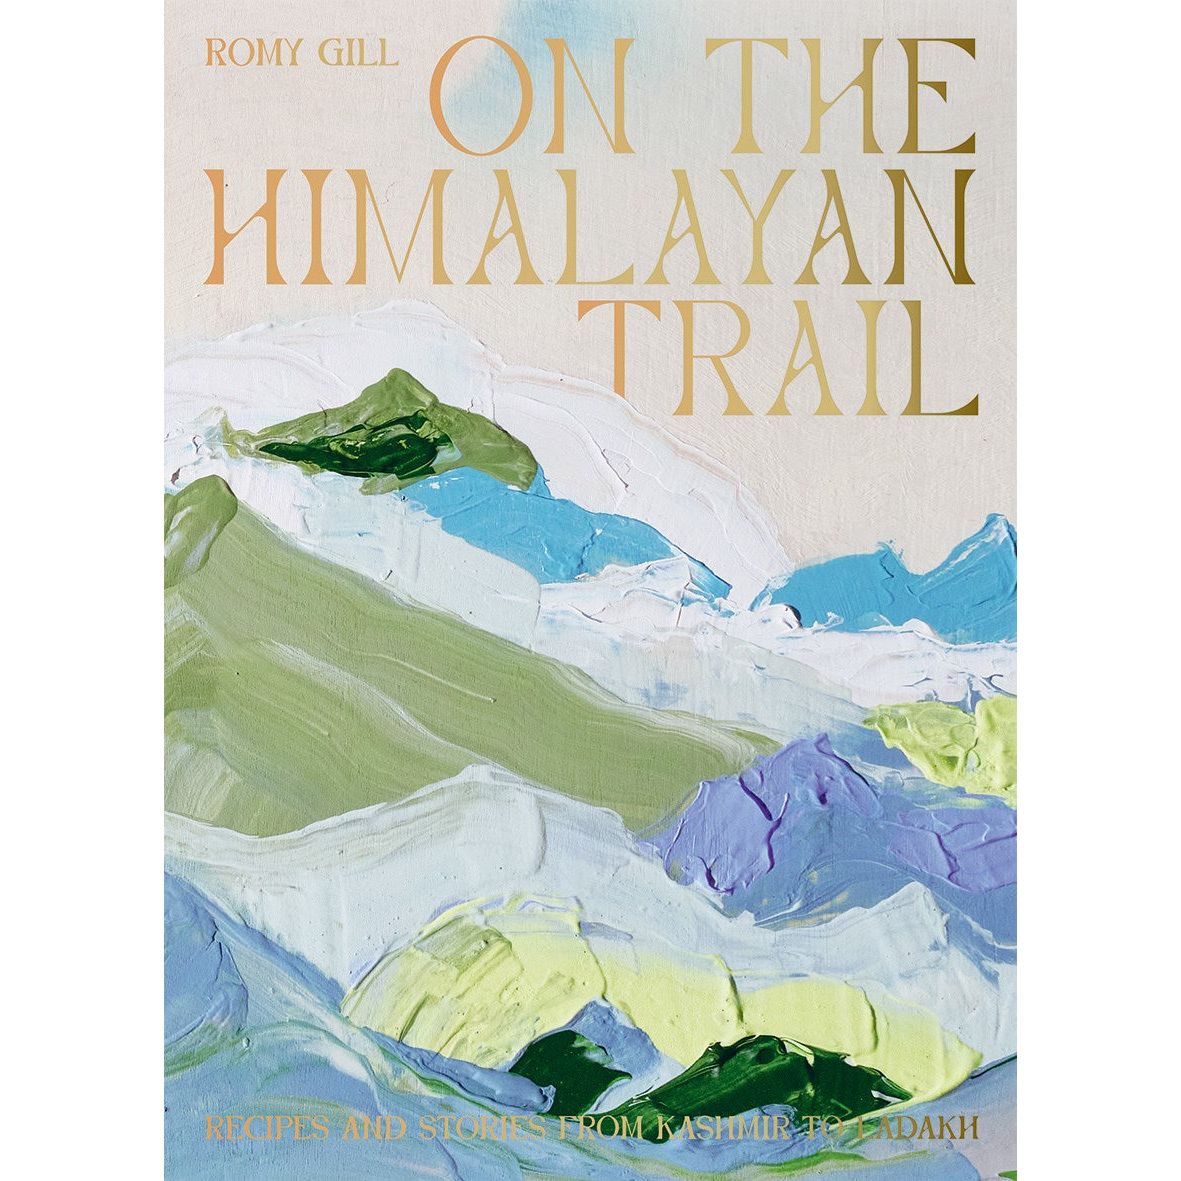 On the Himalayan Trail (Romy Gill)